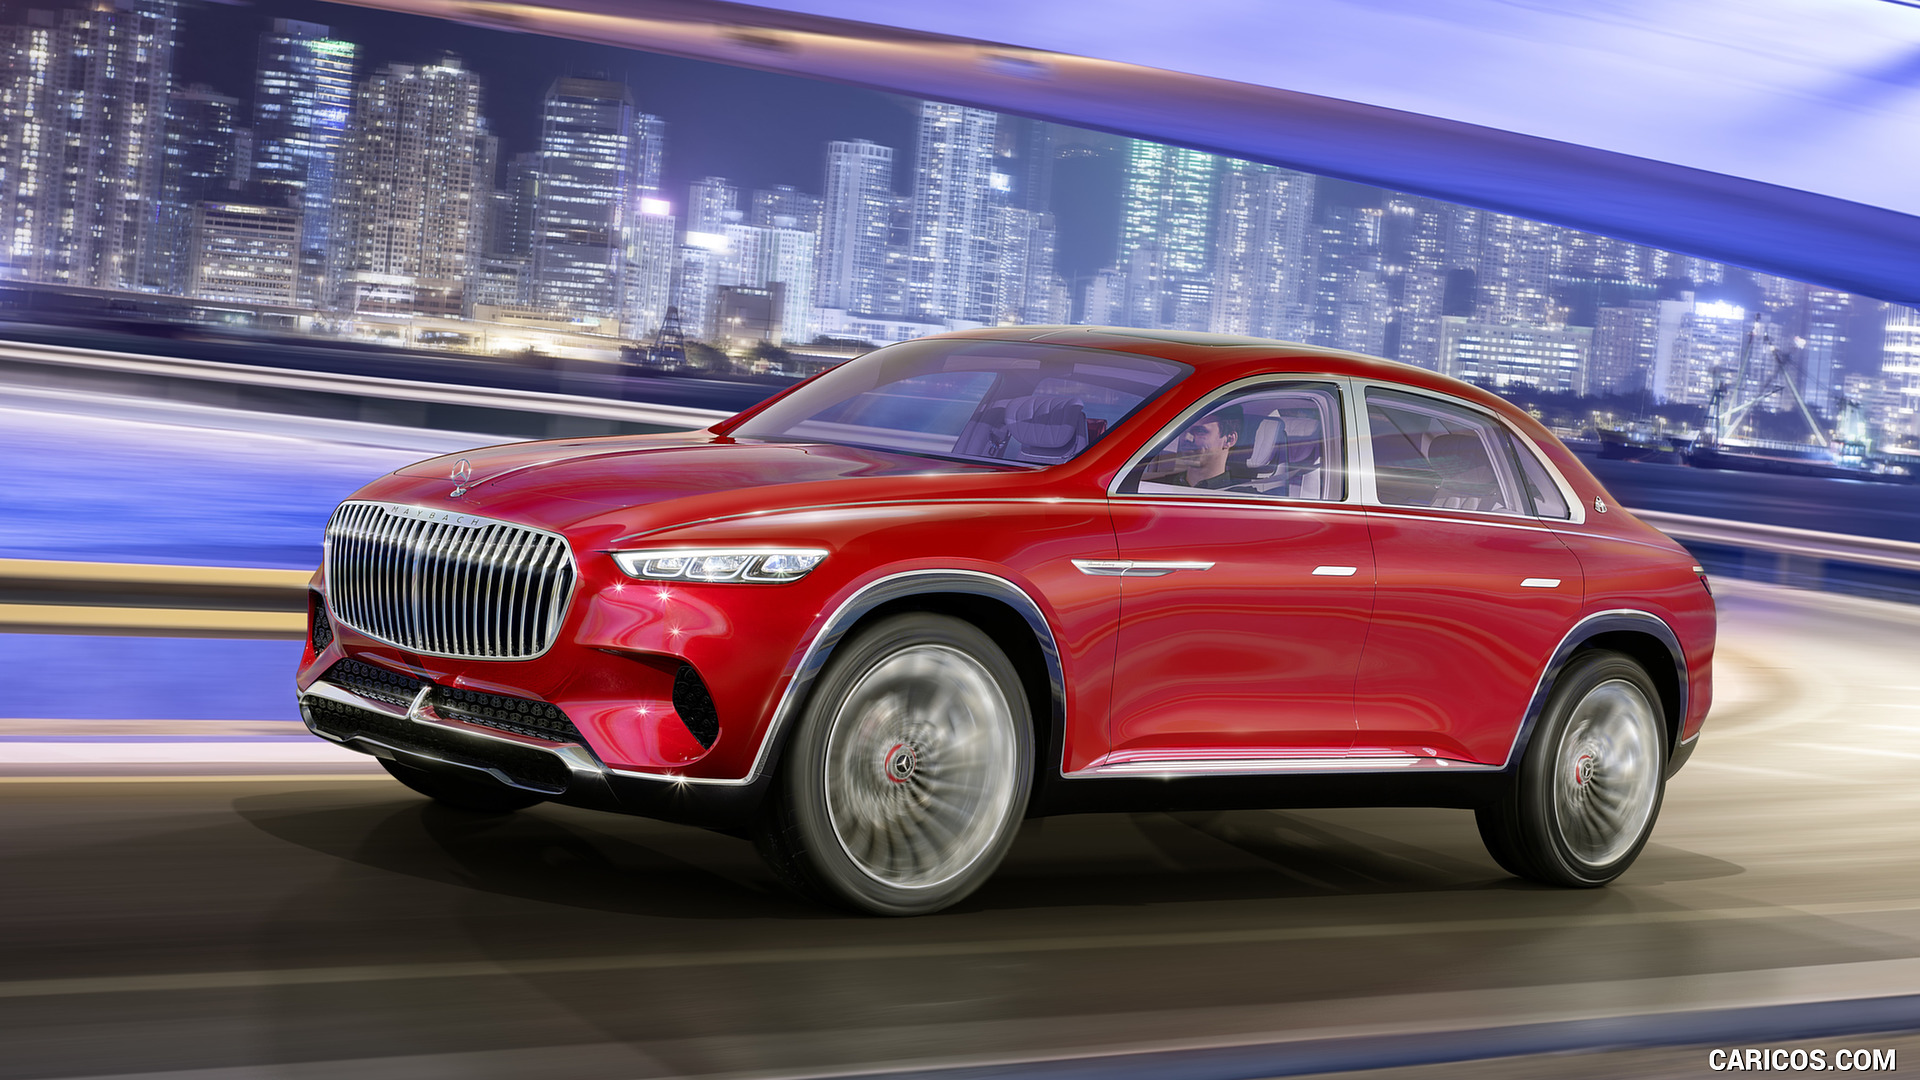 2018 Mercedes-Maybach Vision Ultimate Luxury SUV Concept